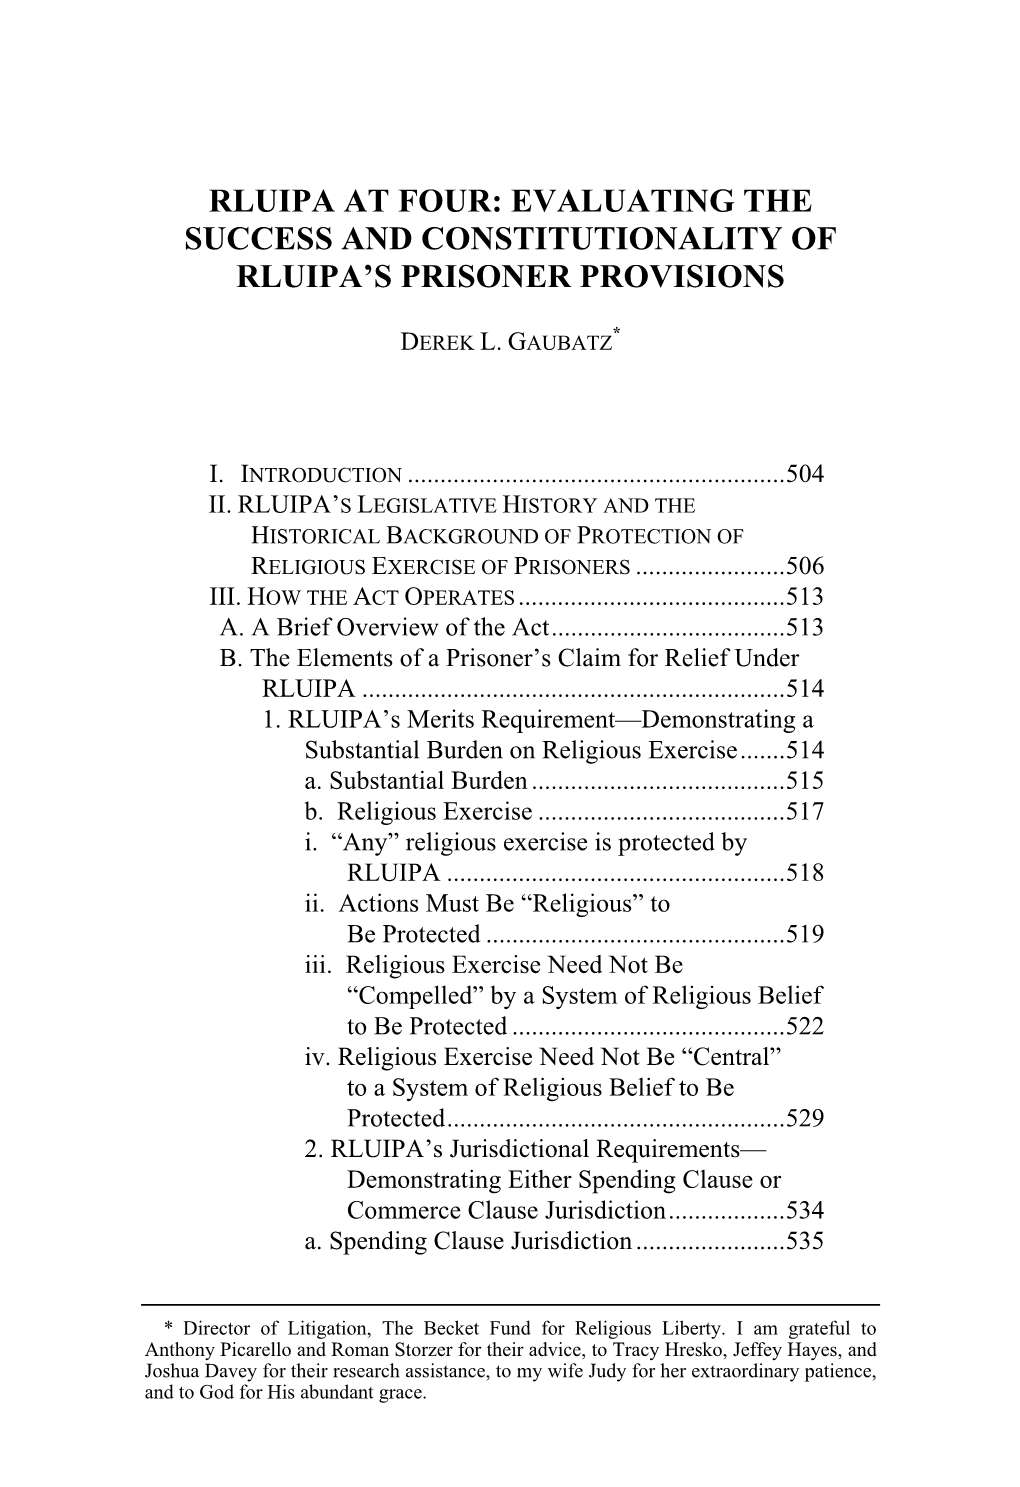 Rluipa at Four: Evaluating the Success and Constitutionality of Rluipa's Prisoner Provisions